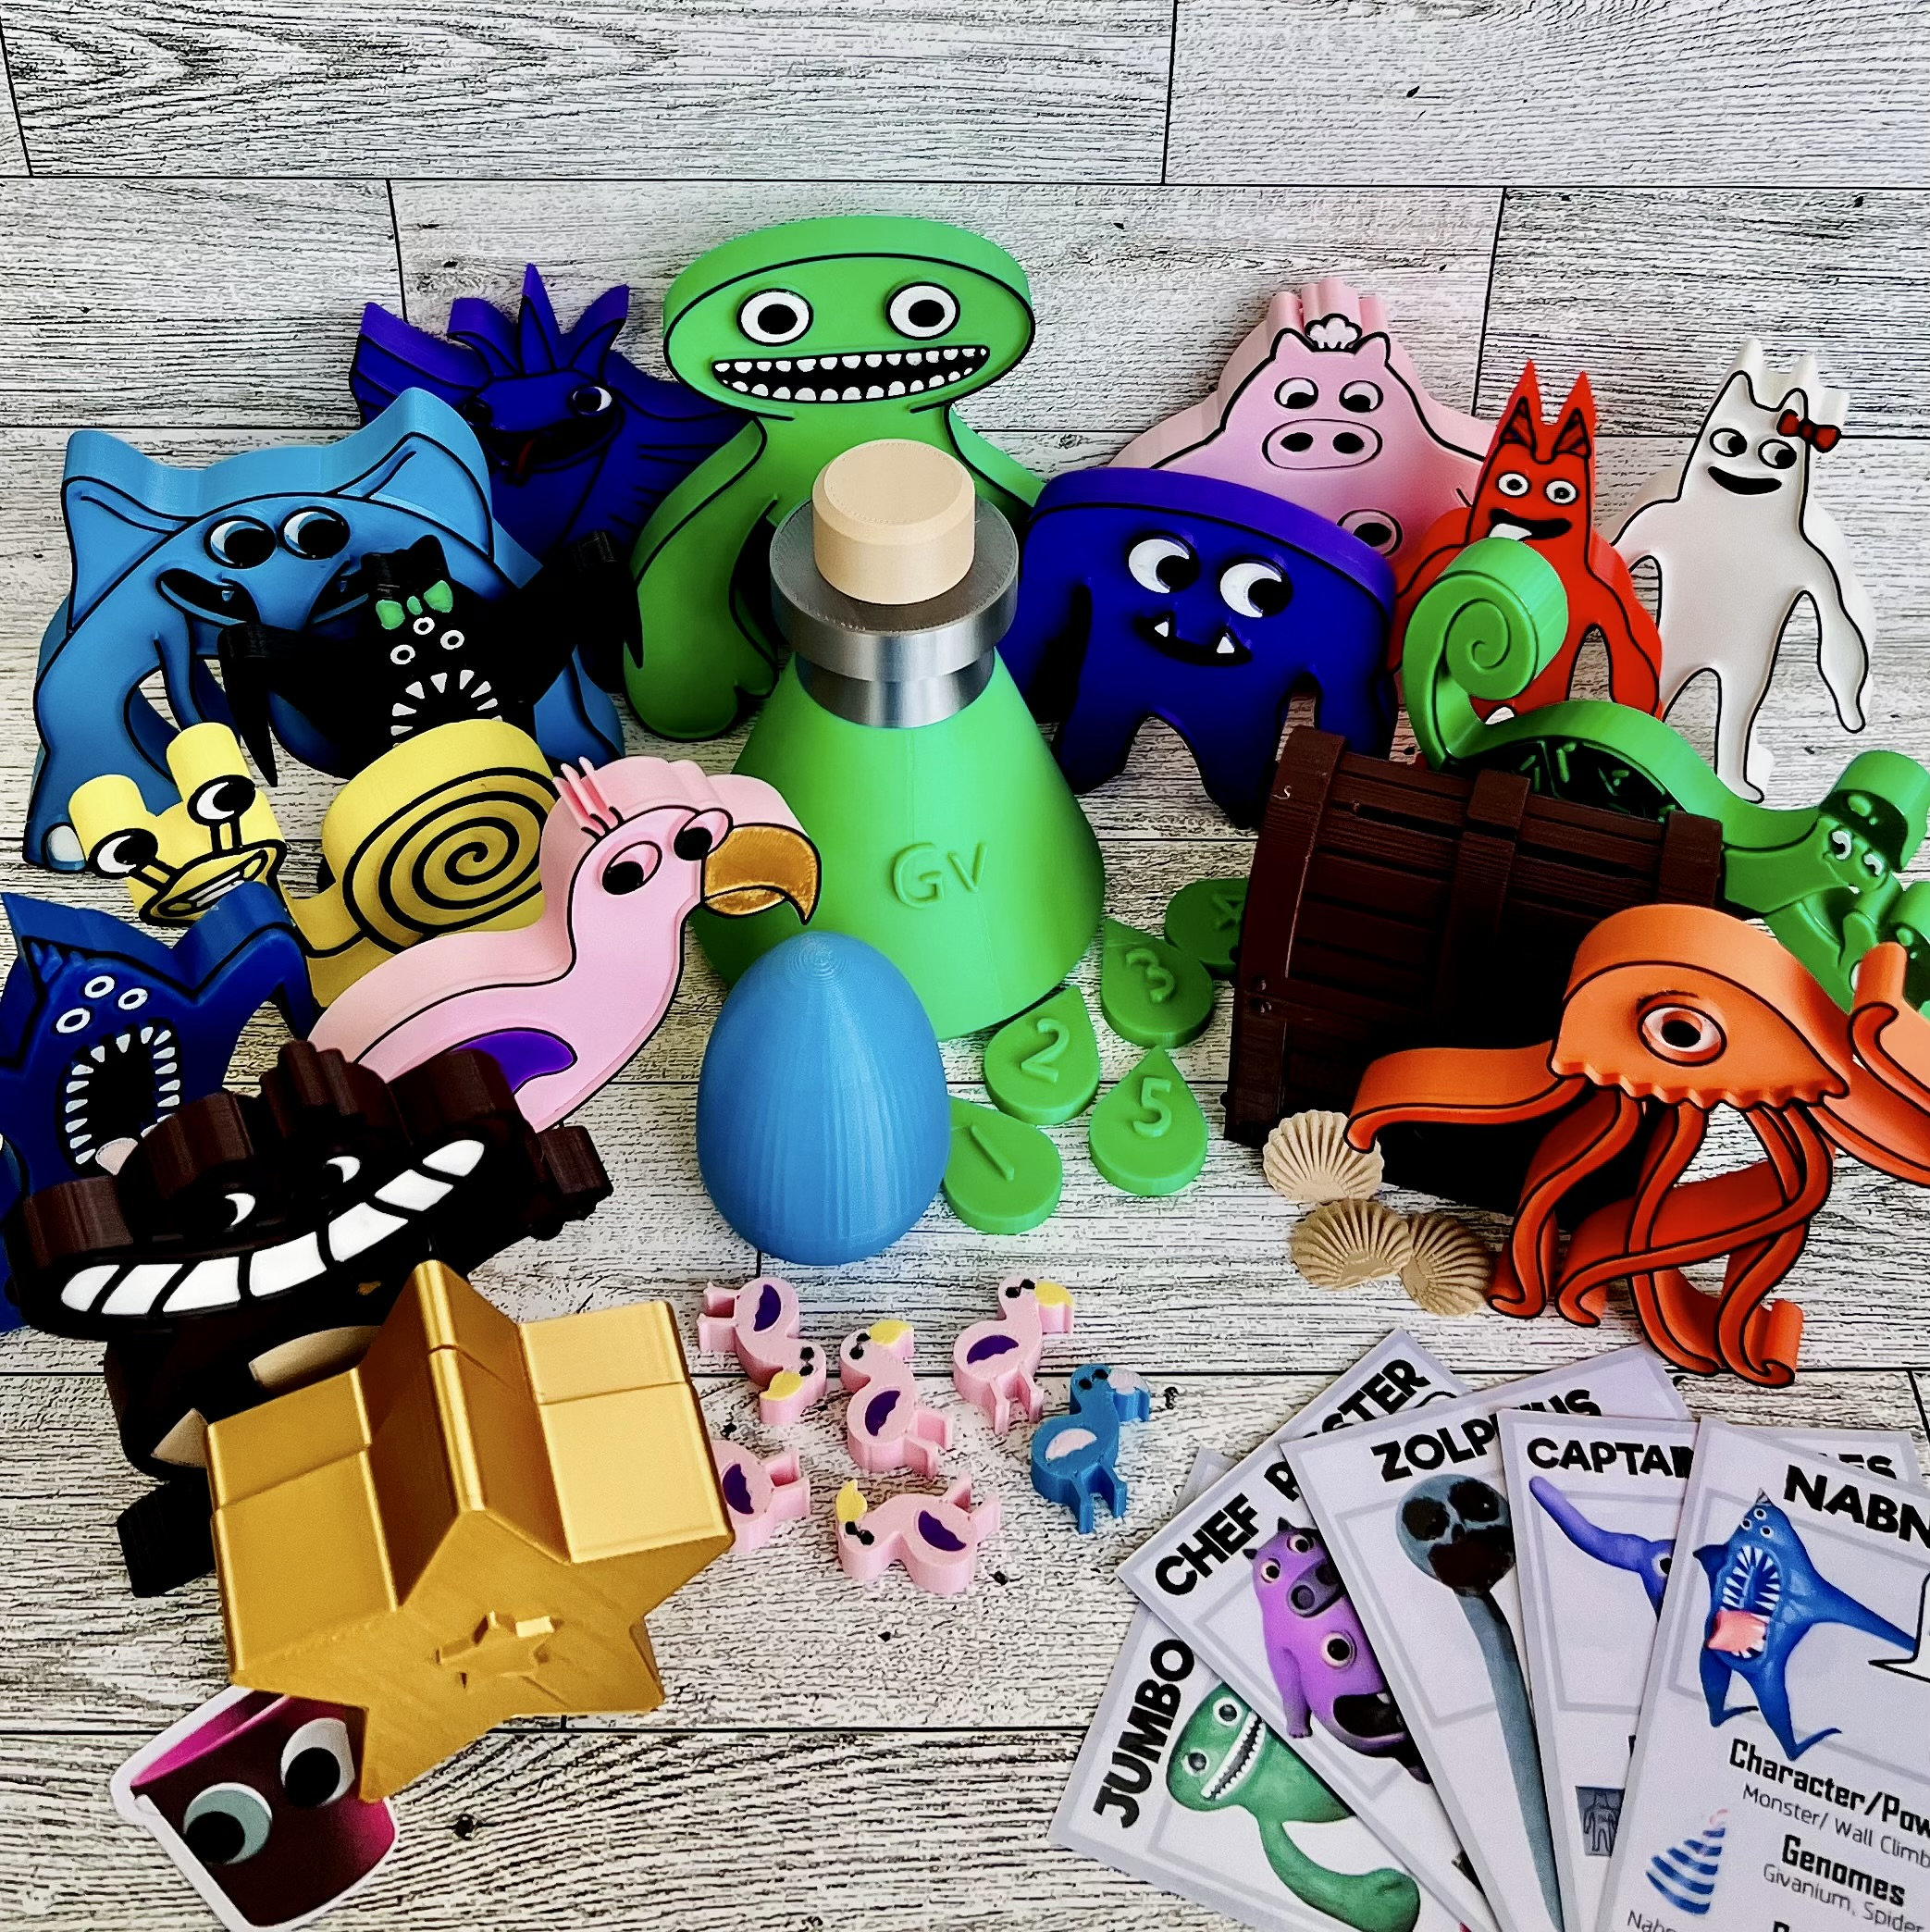 The Multiple Characters Mini Monster Suit with Opila bird and Jumb0 J0sh